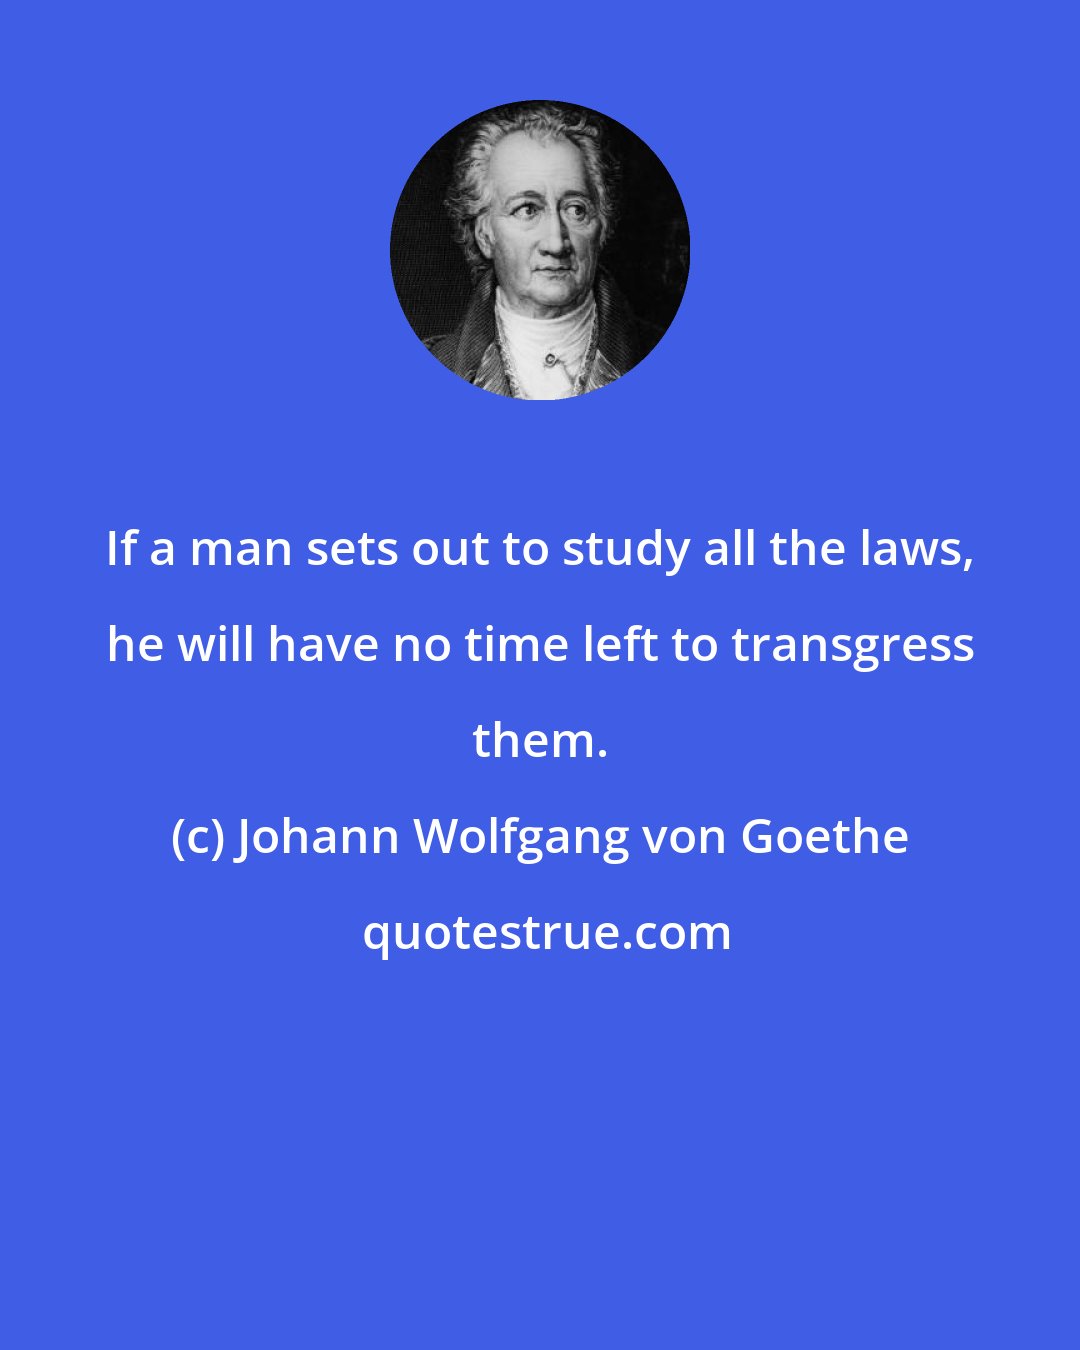 Johann Wolfgang von Goethe: If a man sets out to study all the laws, he will have no time left to transgress them.